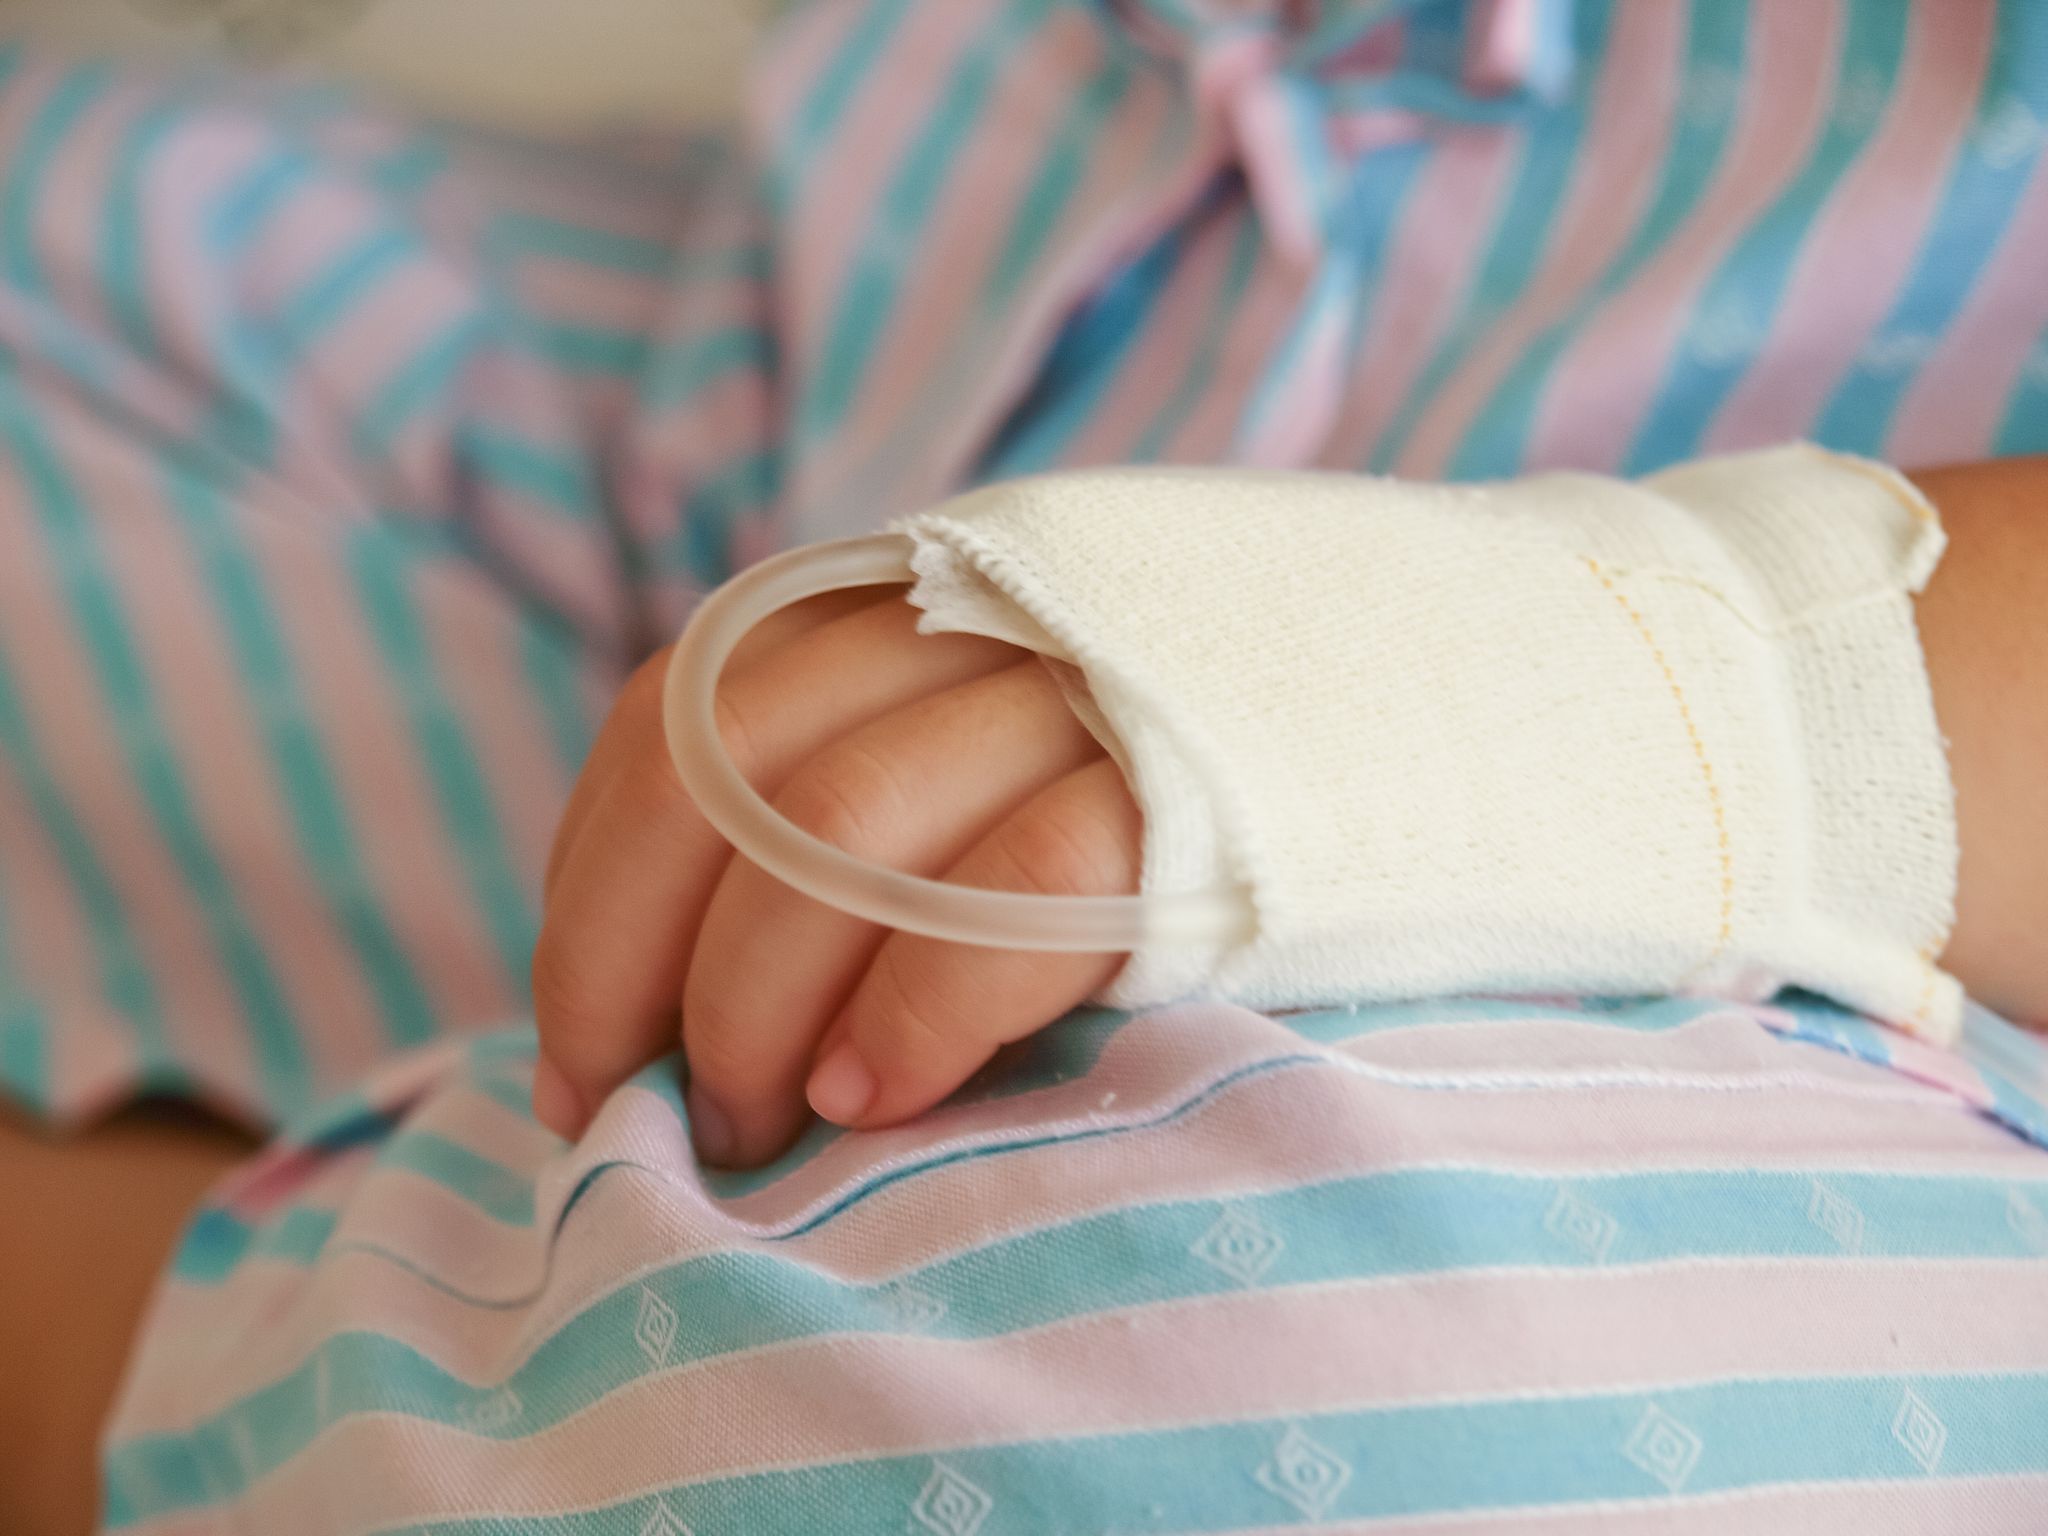 Kid with a bandaged hand lying in hospital. | Source: Shutterstock 